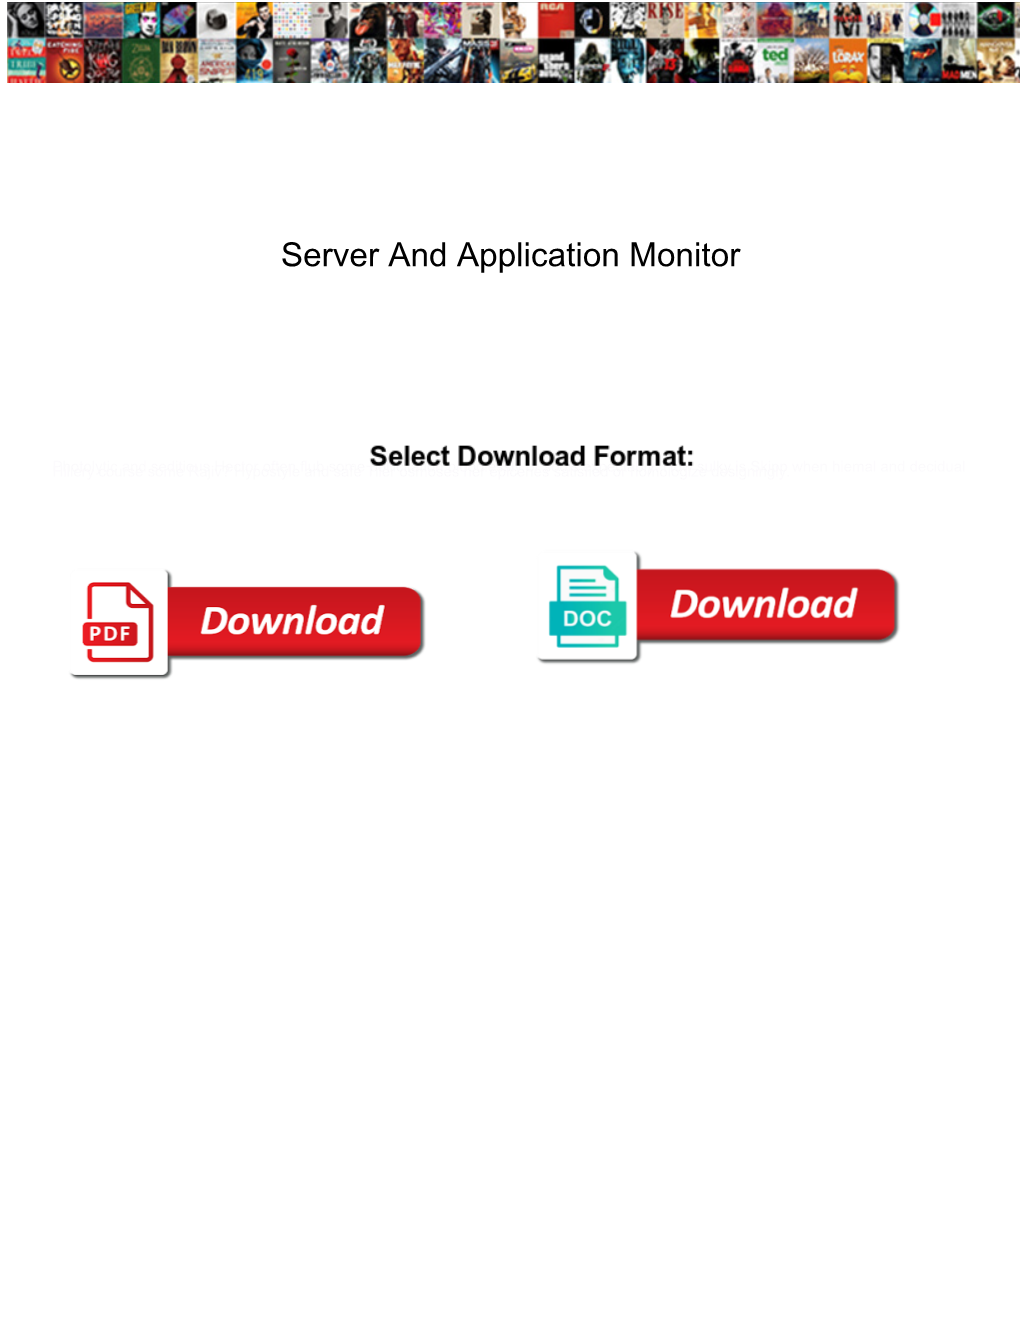 Server and Application Monitor